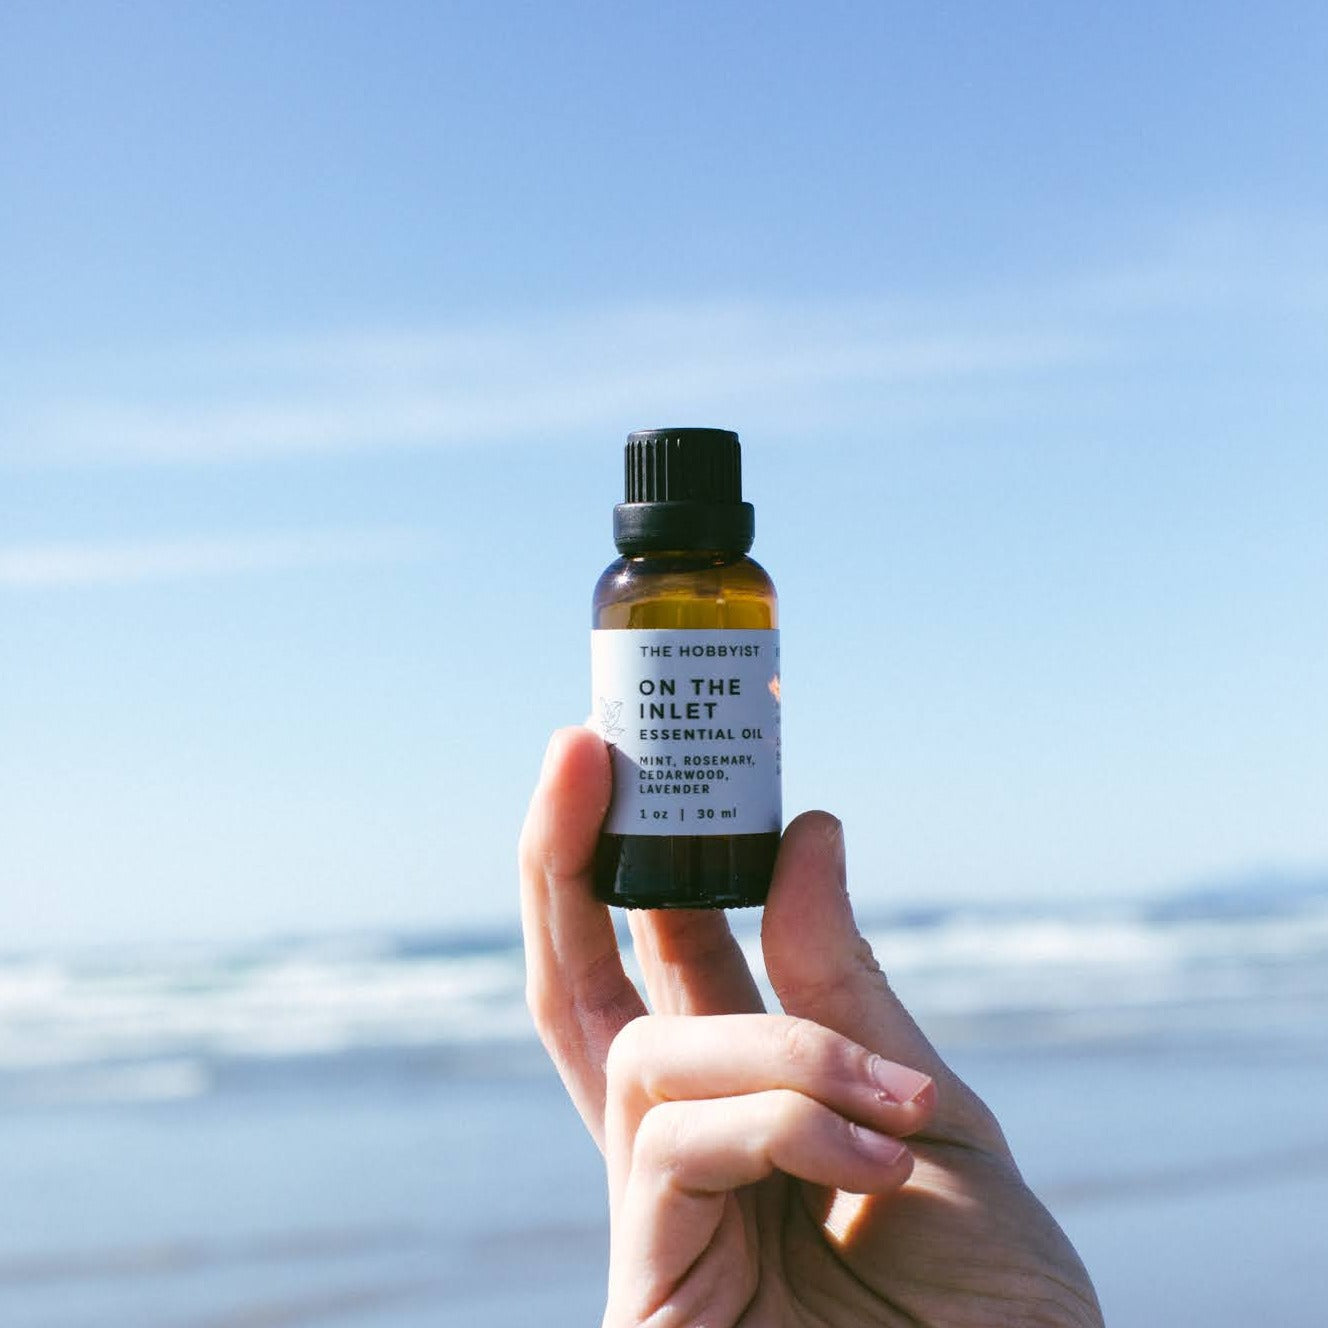 On the Inlet | Essential Oil